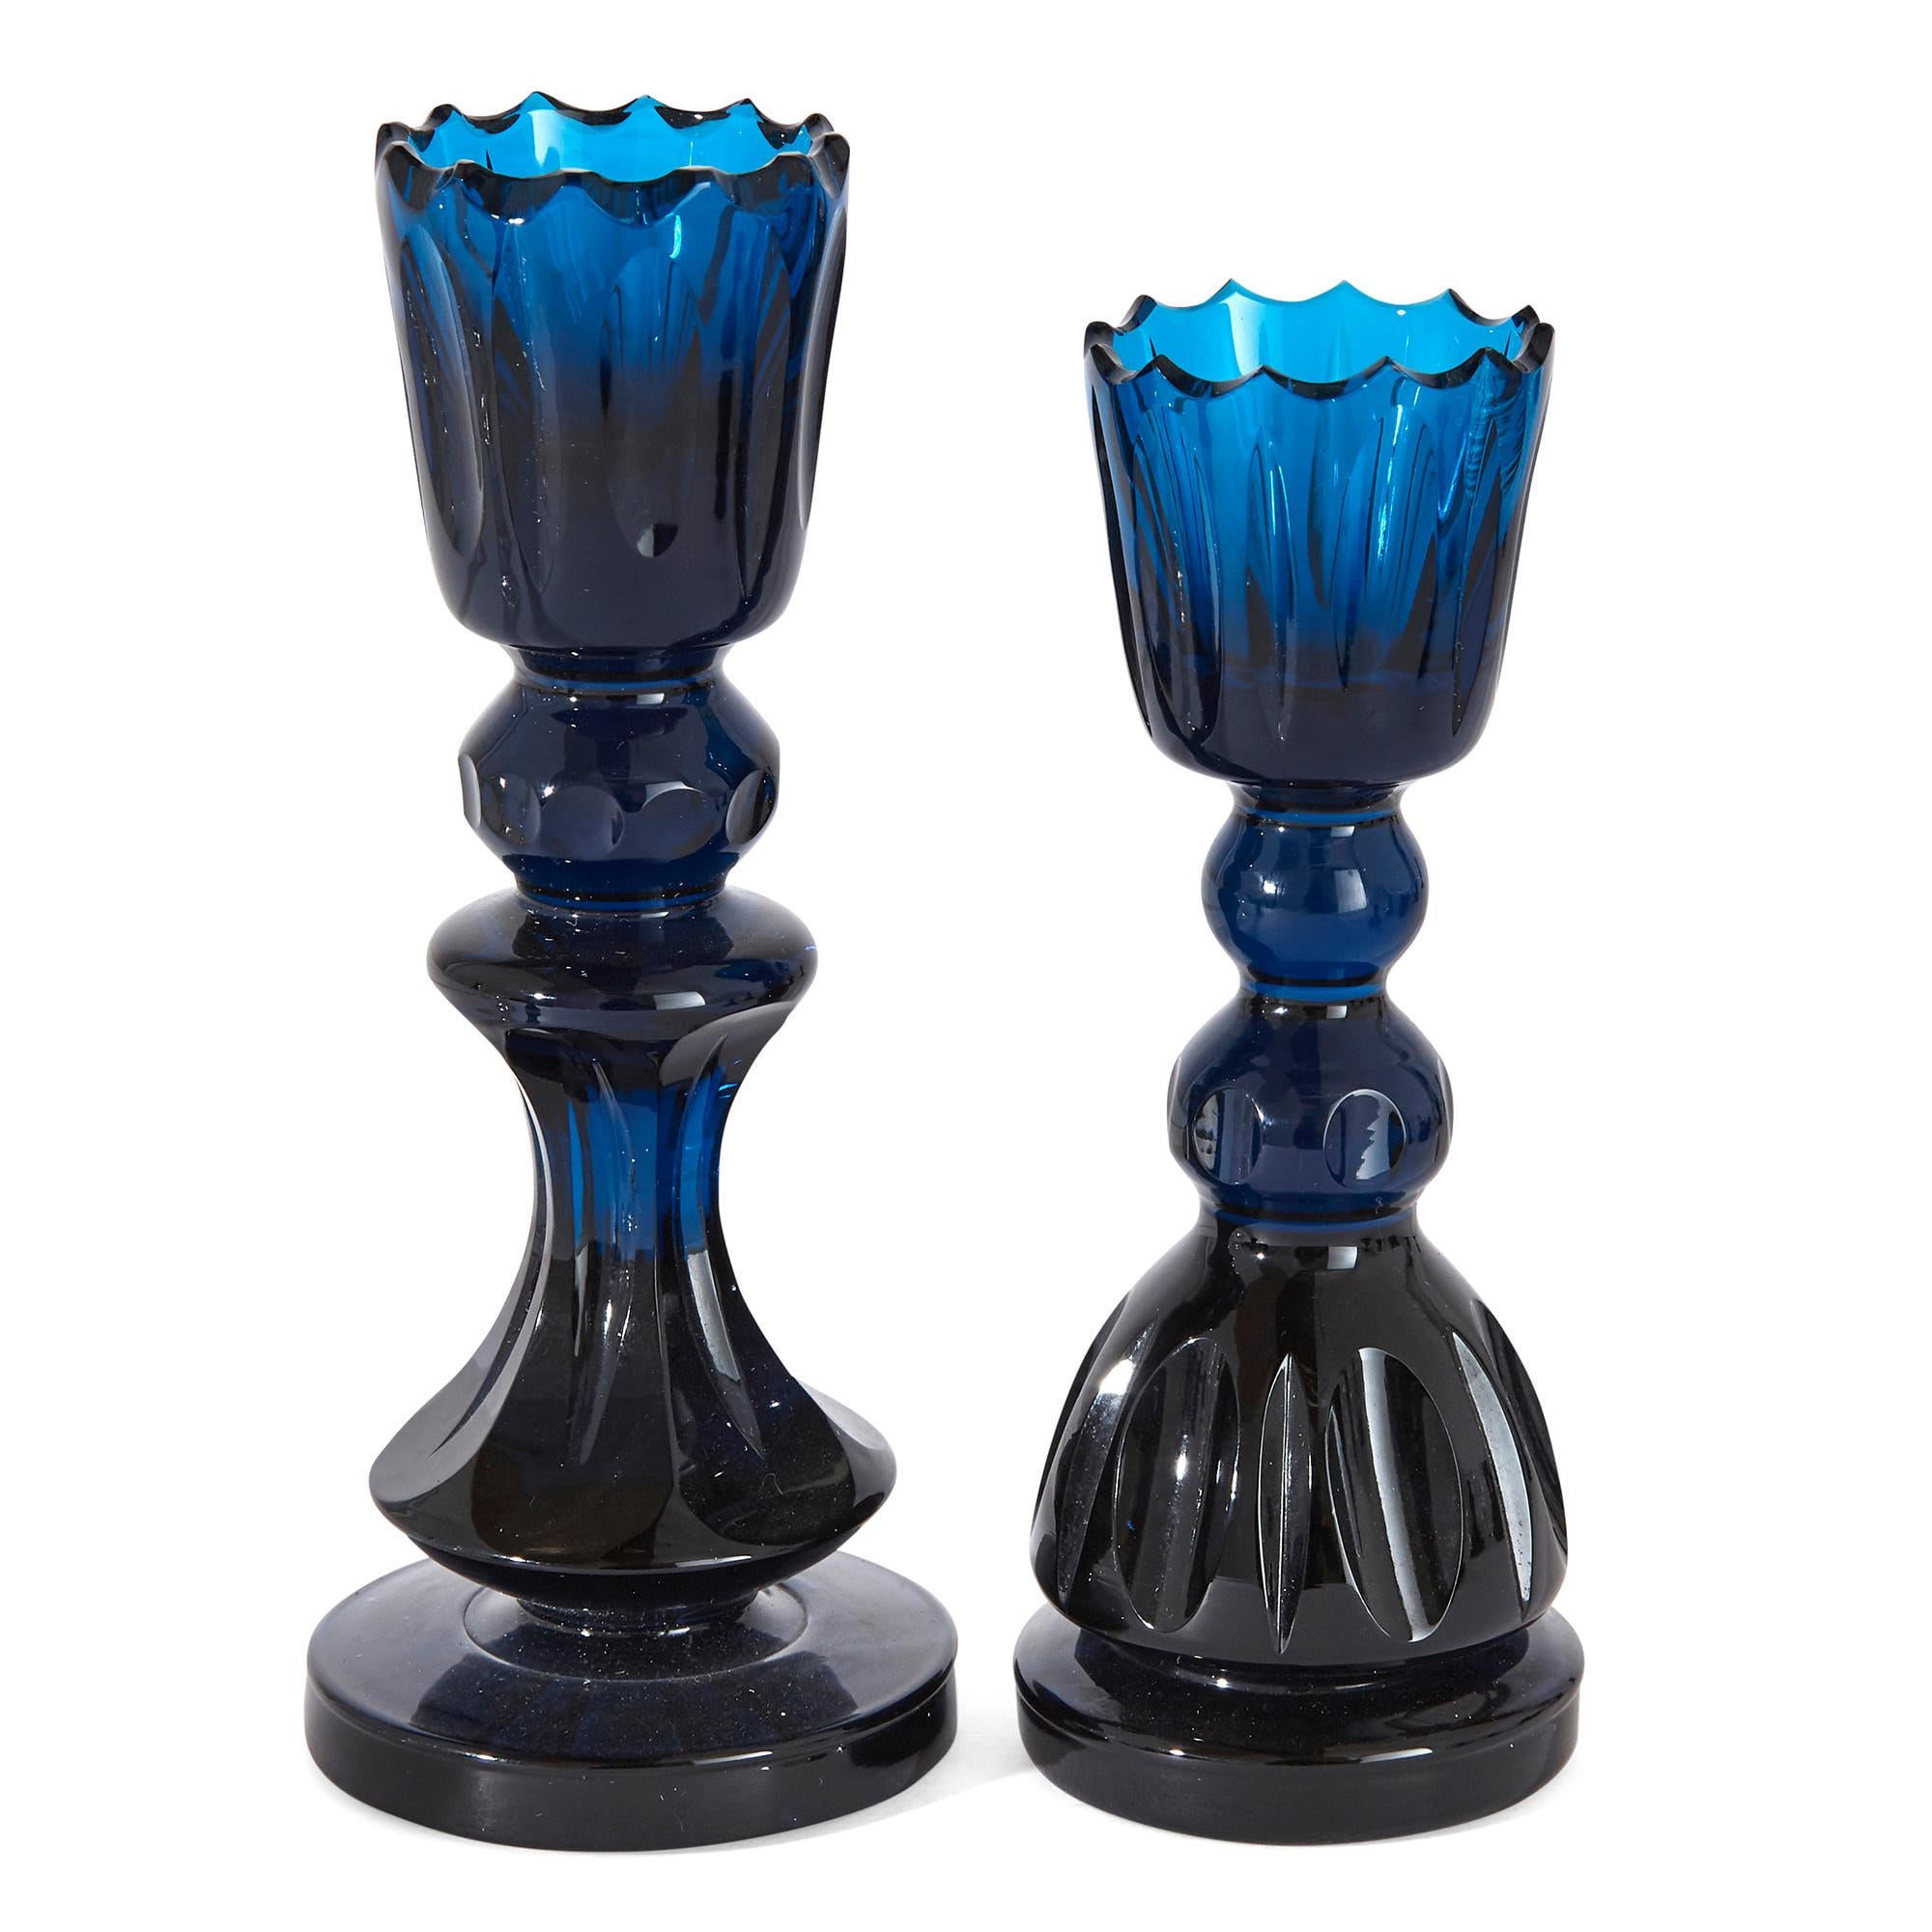 This set of chess pieces is formed from cut lead crystal, one side of blue crystal and the other of clear. The pieces (except the rooks) are raised on waisted socles above circular bases. Each piece is beautifully crafted by Webb Corbett at the time